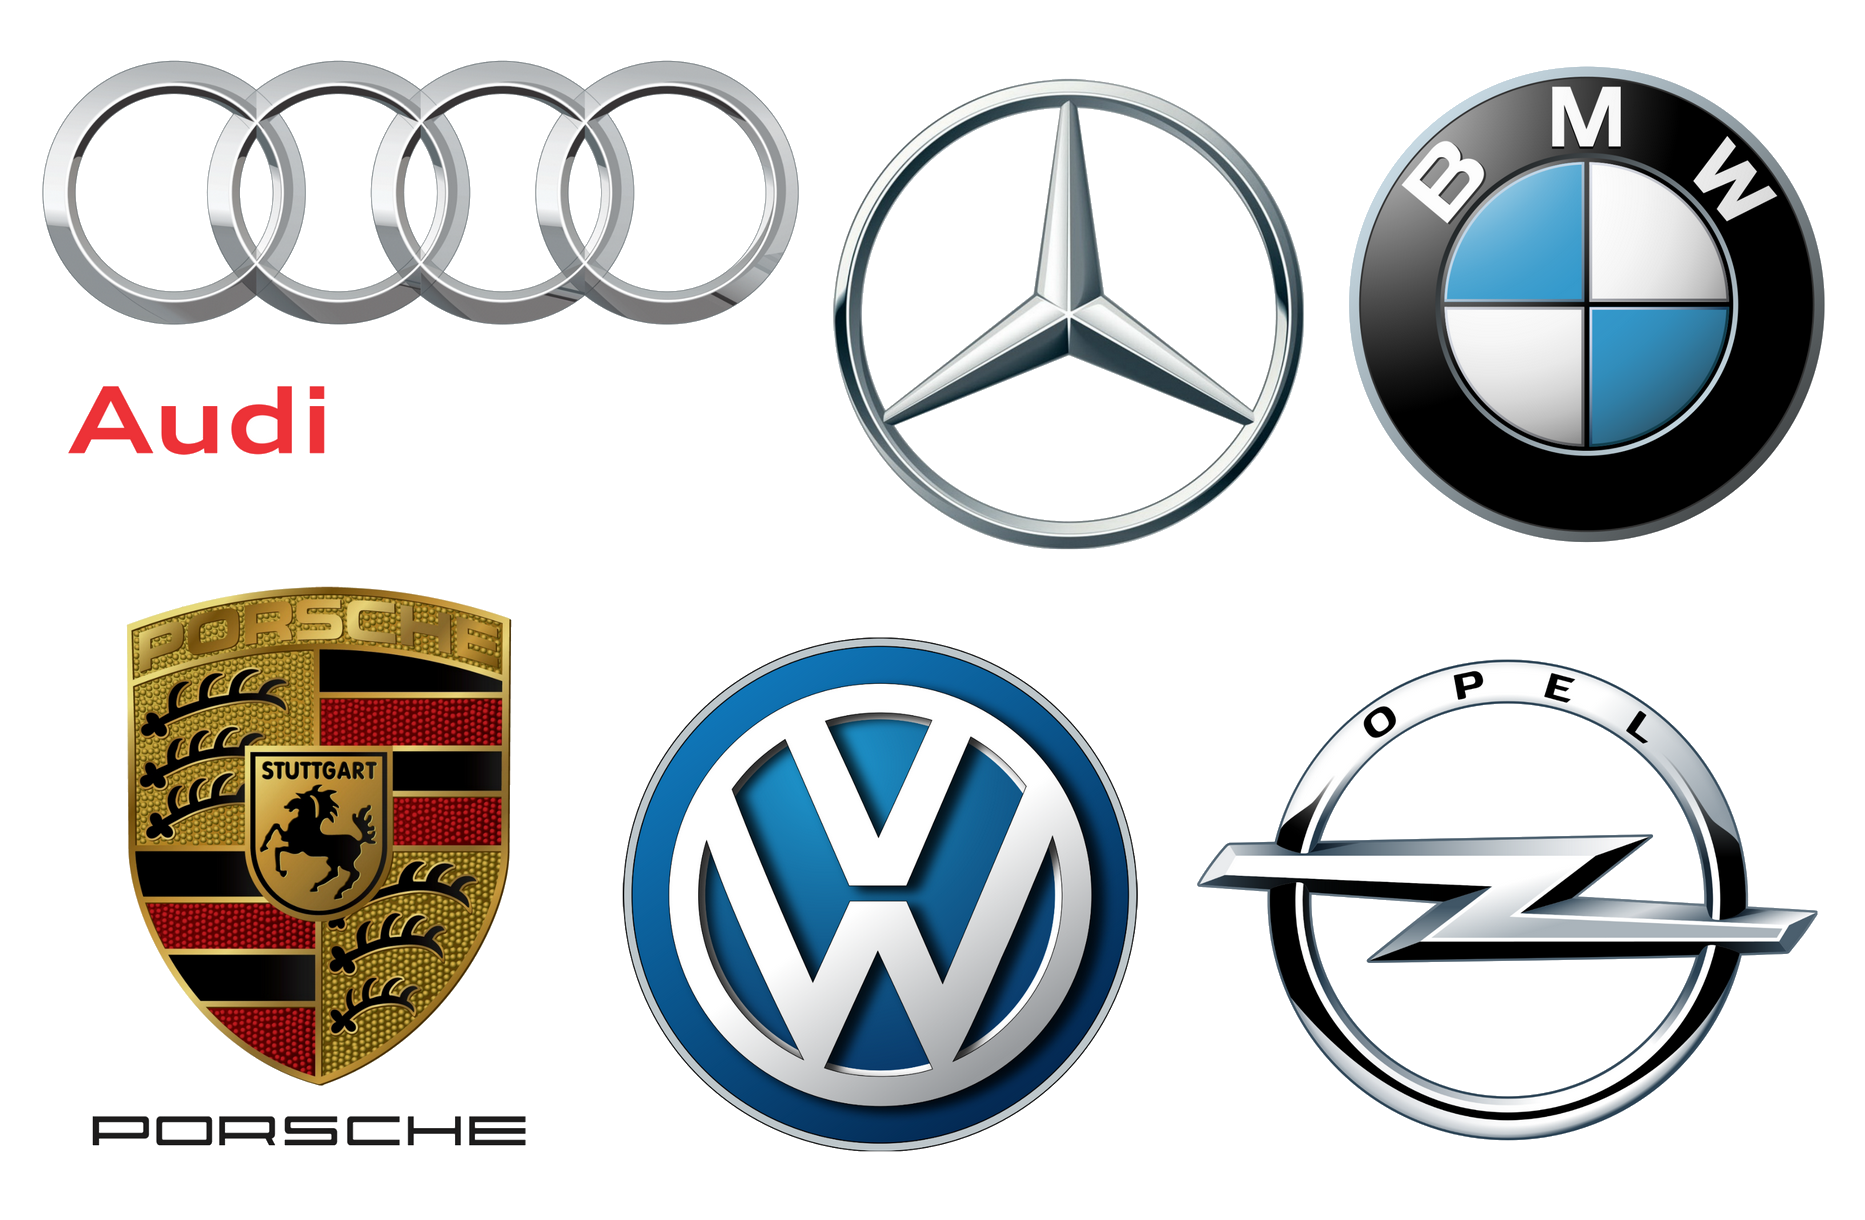 it is a german automobile company